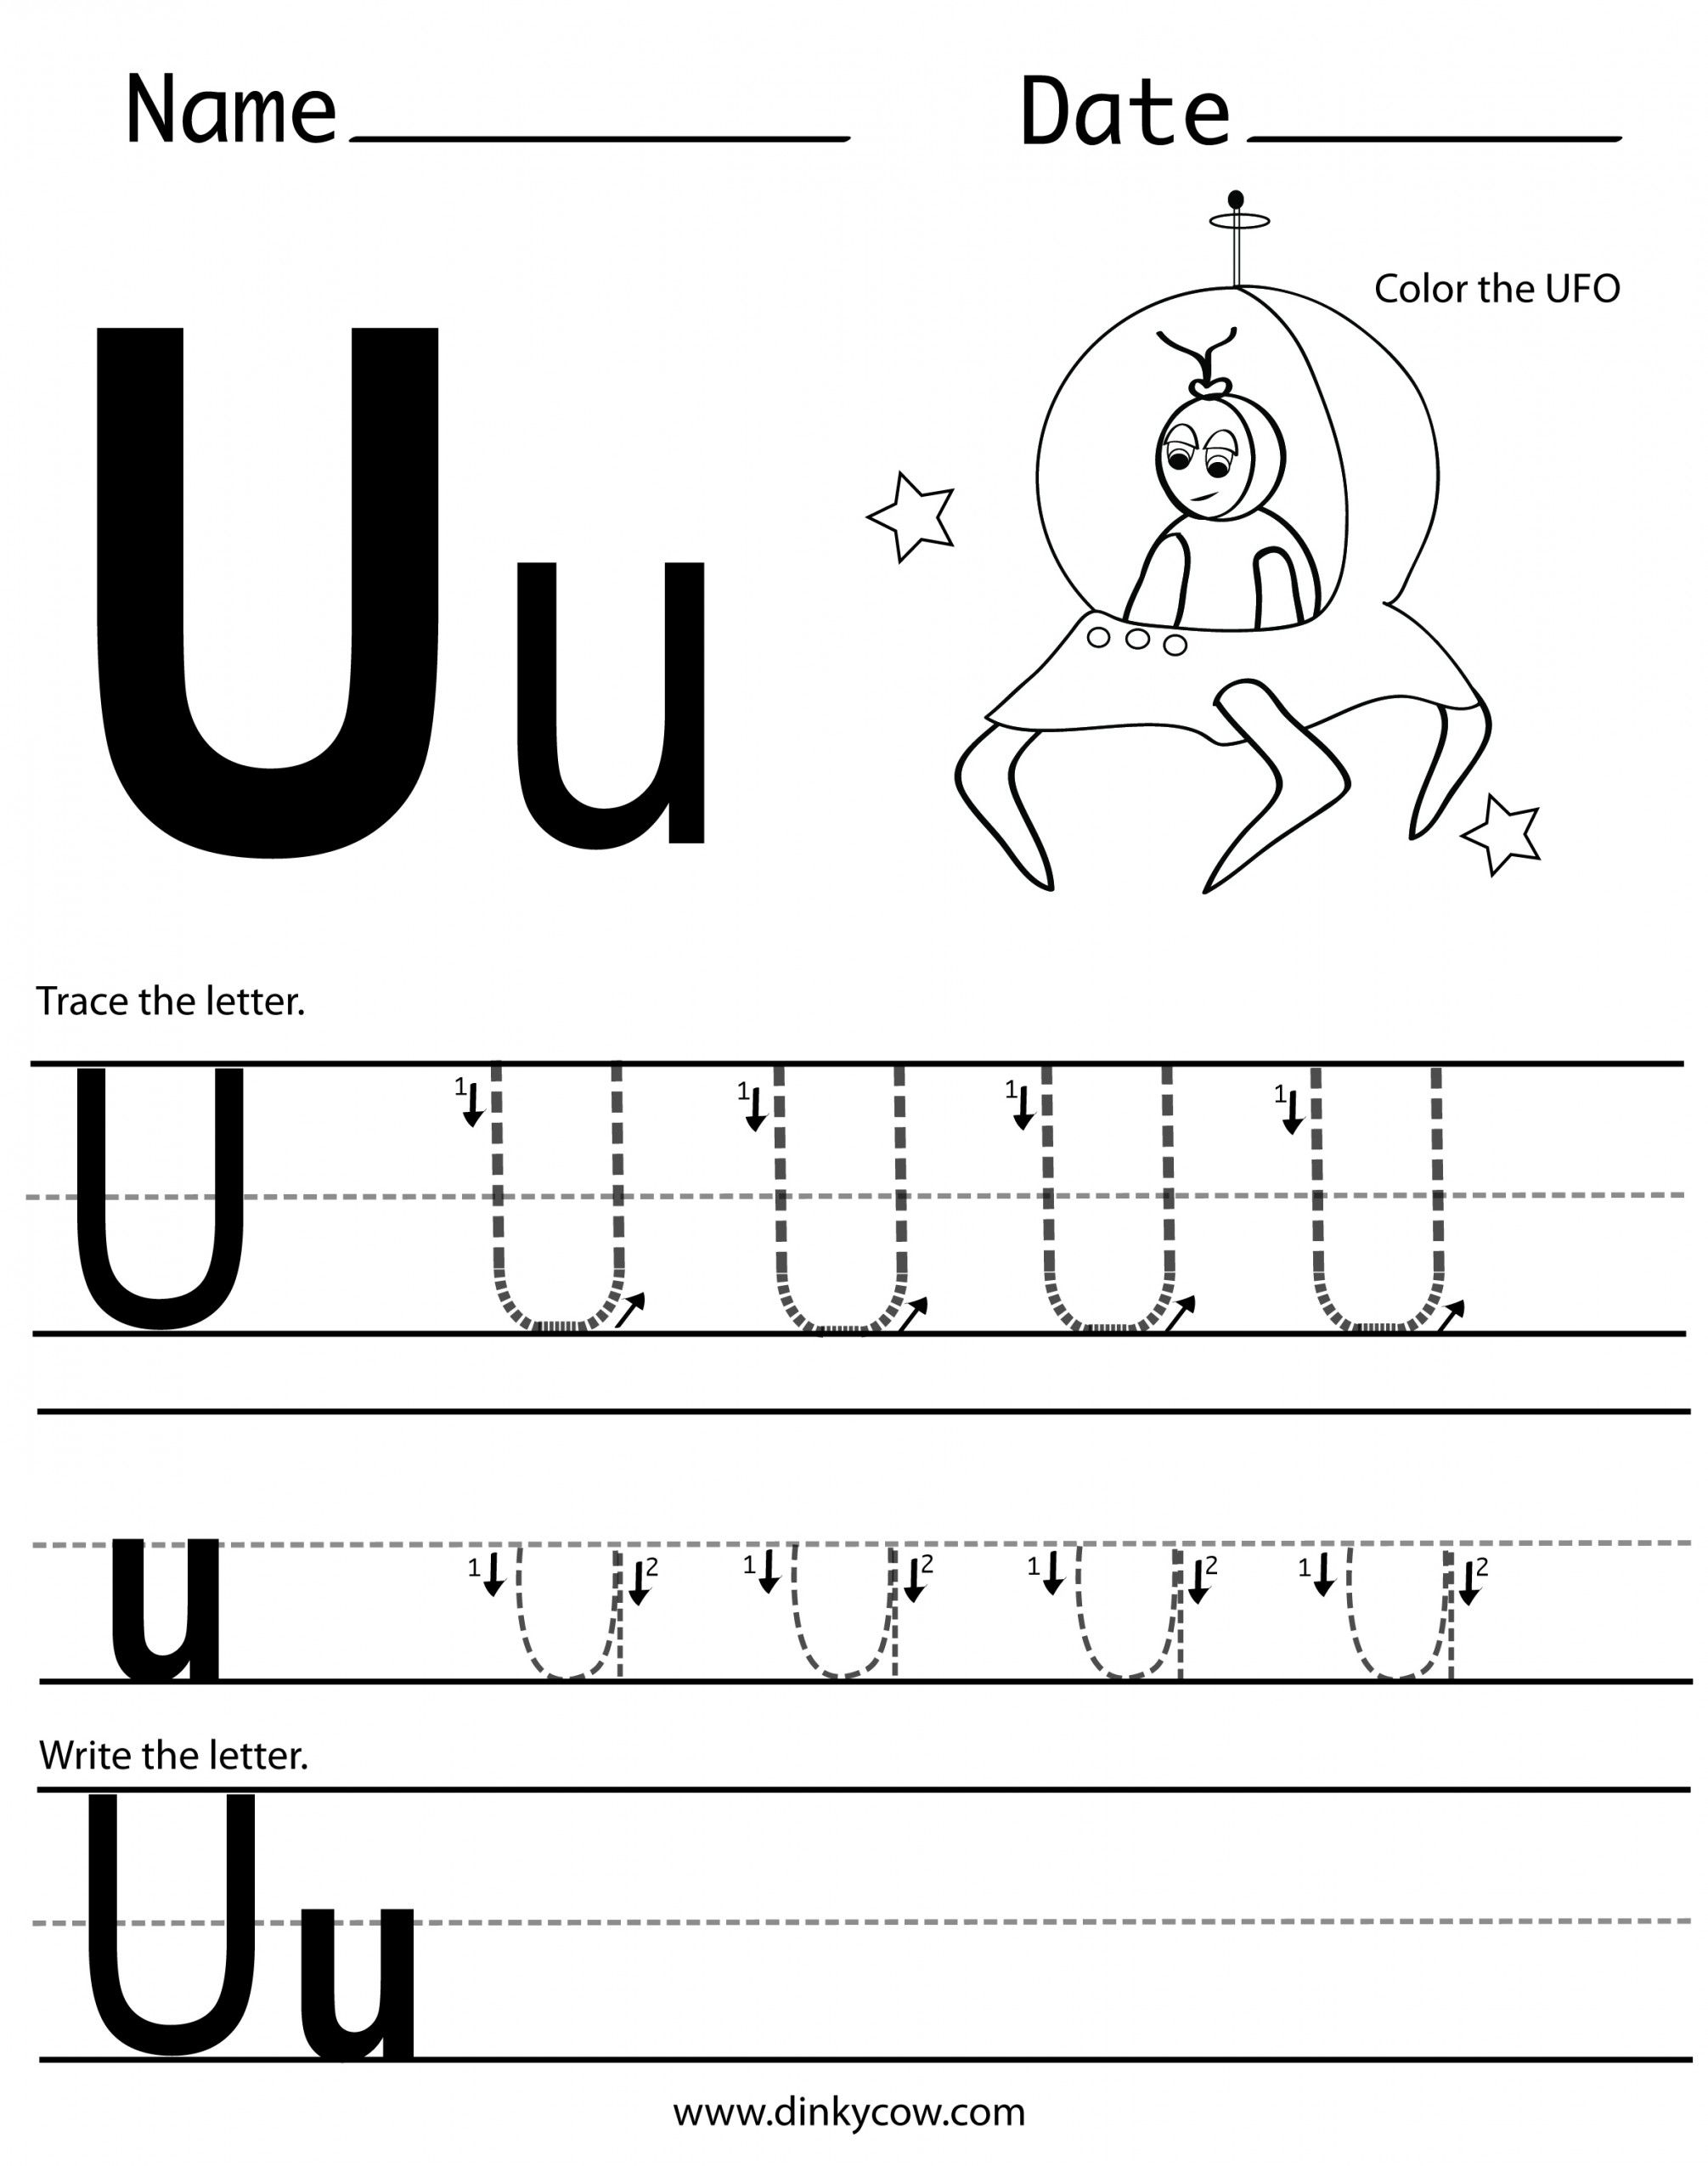 12 Letter U Worksheets For Young Learners | Kittybabylove intended for U Letter Tracing